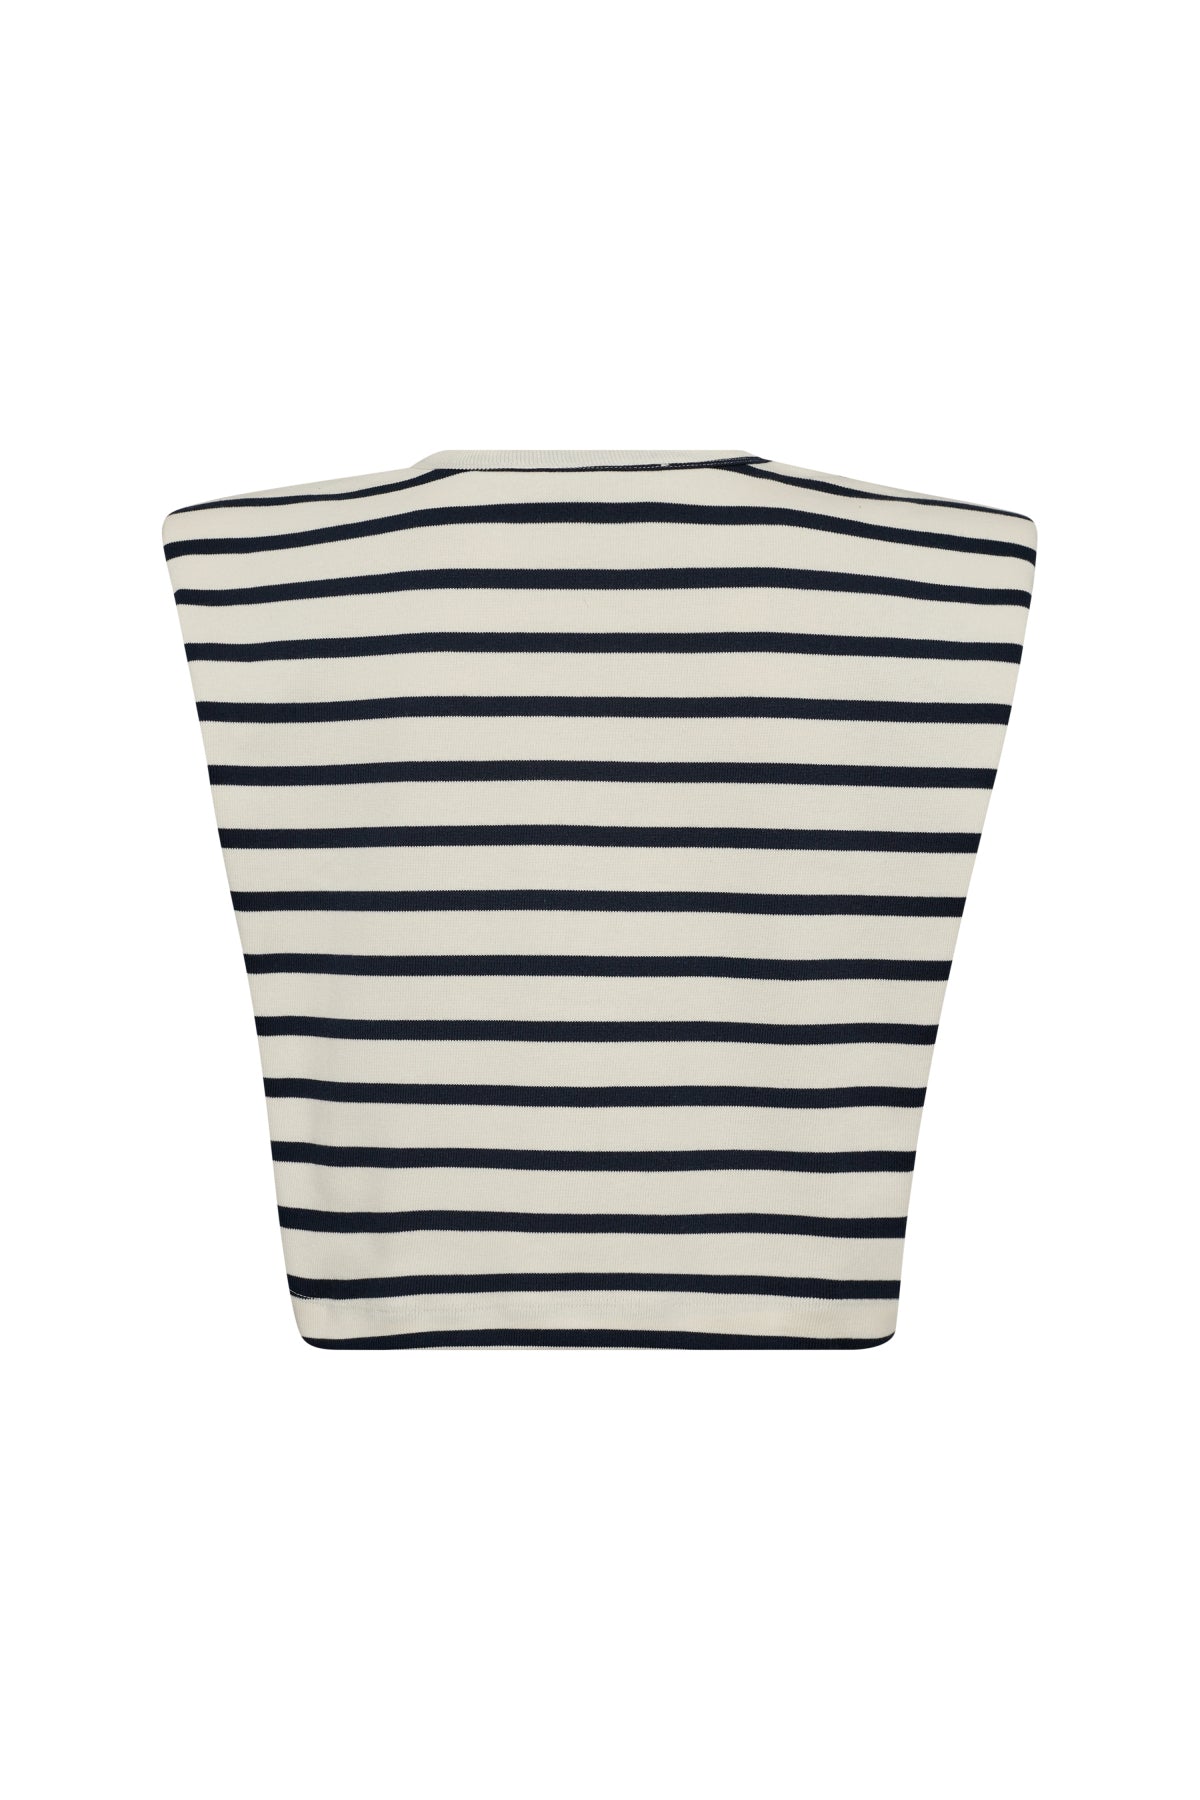 Co'Couture Classic Stripe ED Crop Tee - Off White - RUM Amsterdam